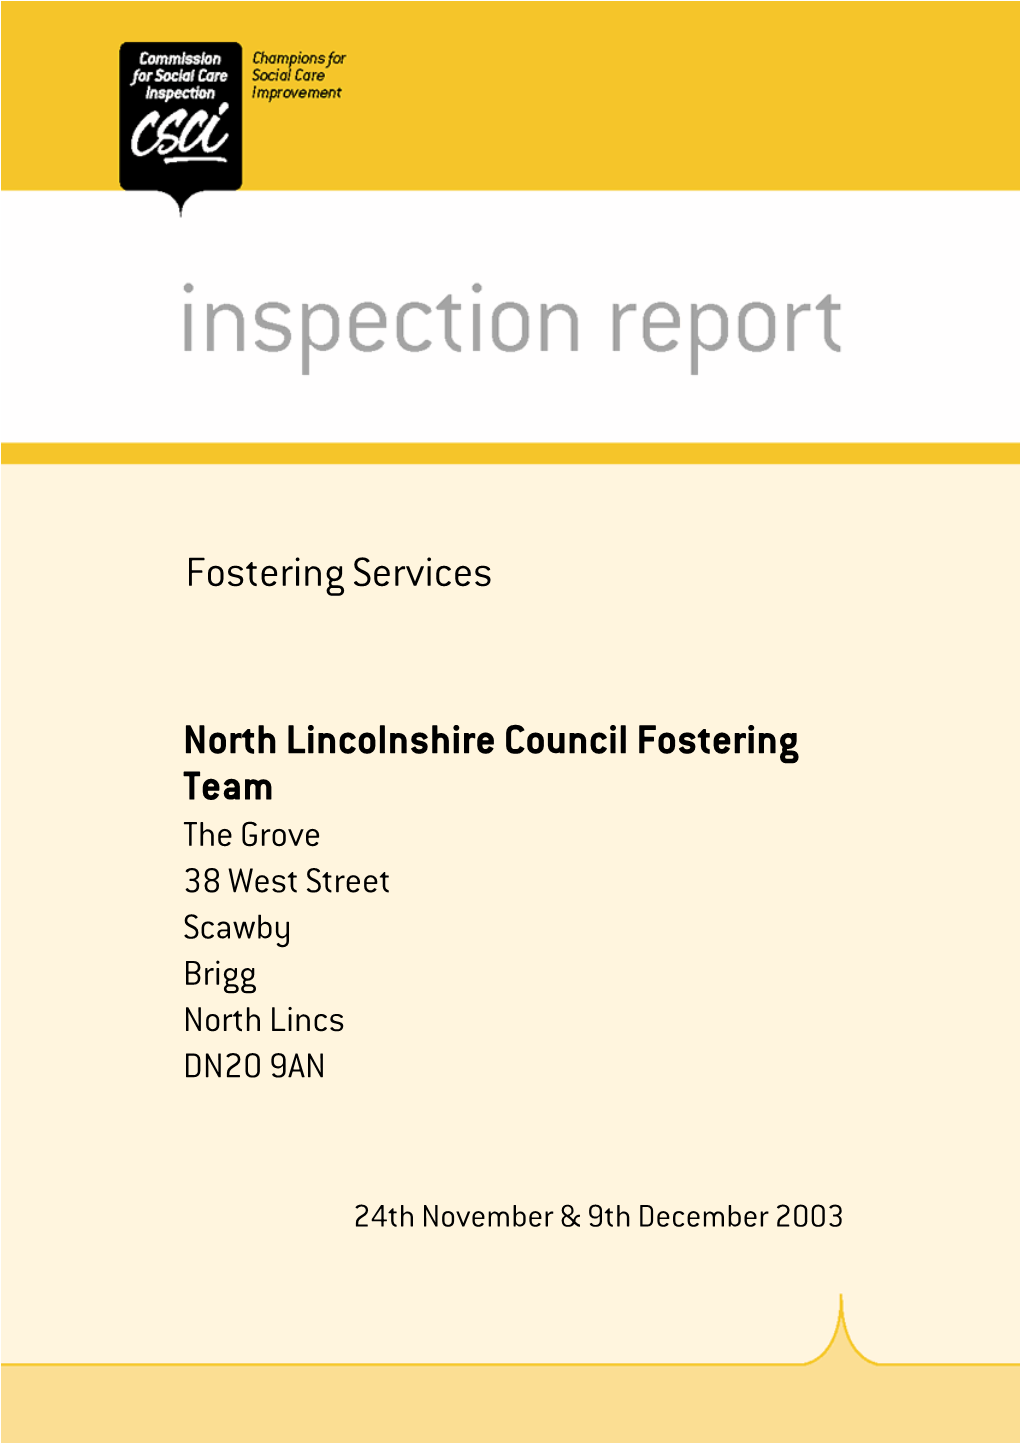 North Lincolnshire Council Fostering Team